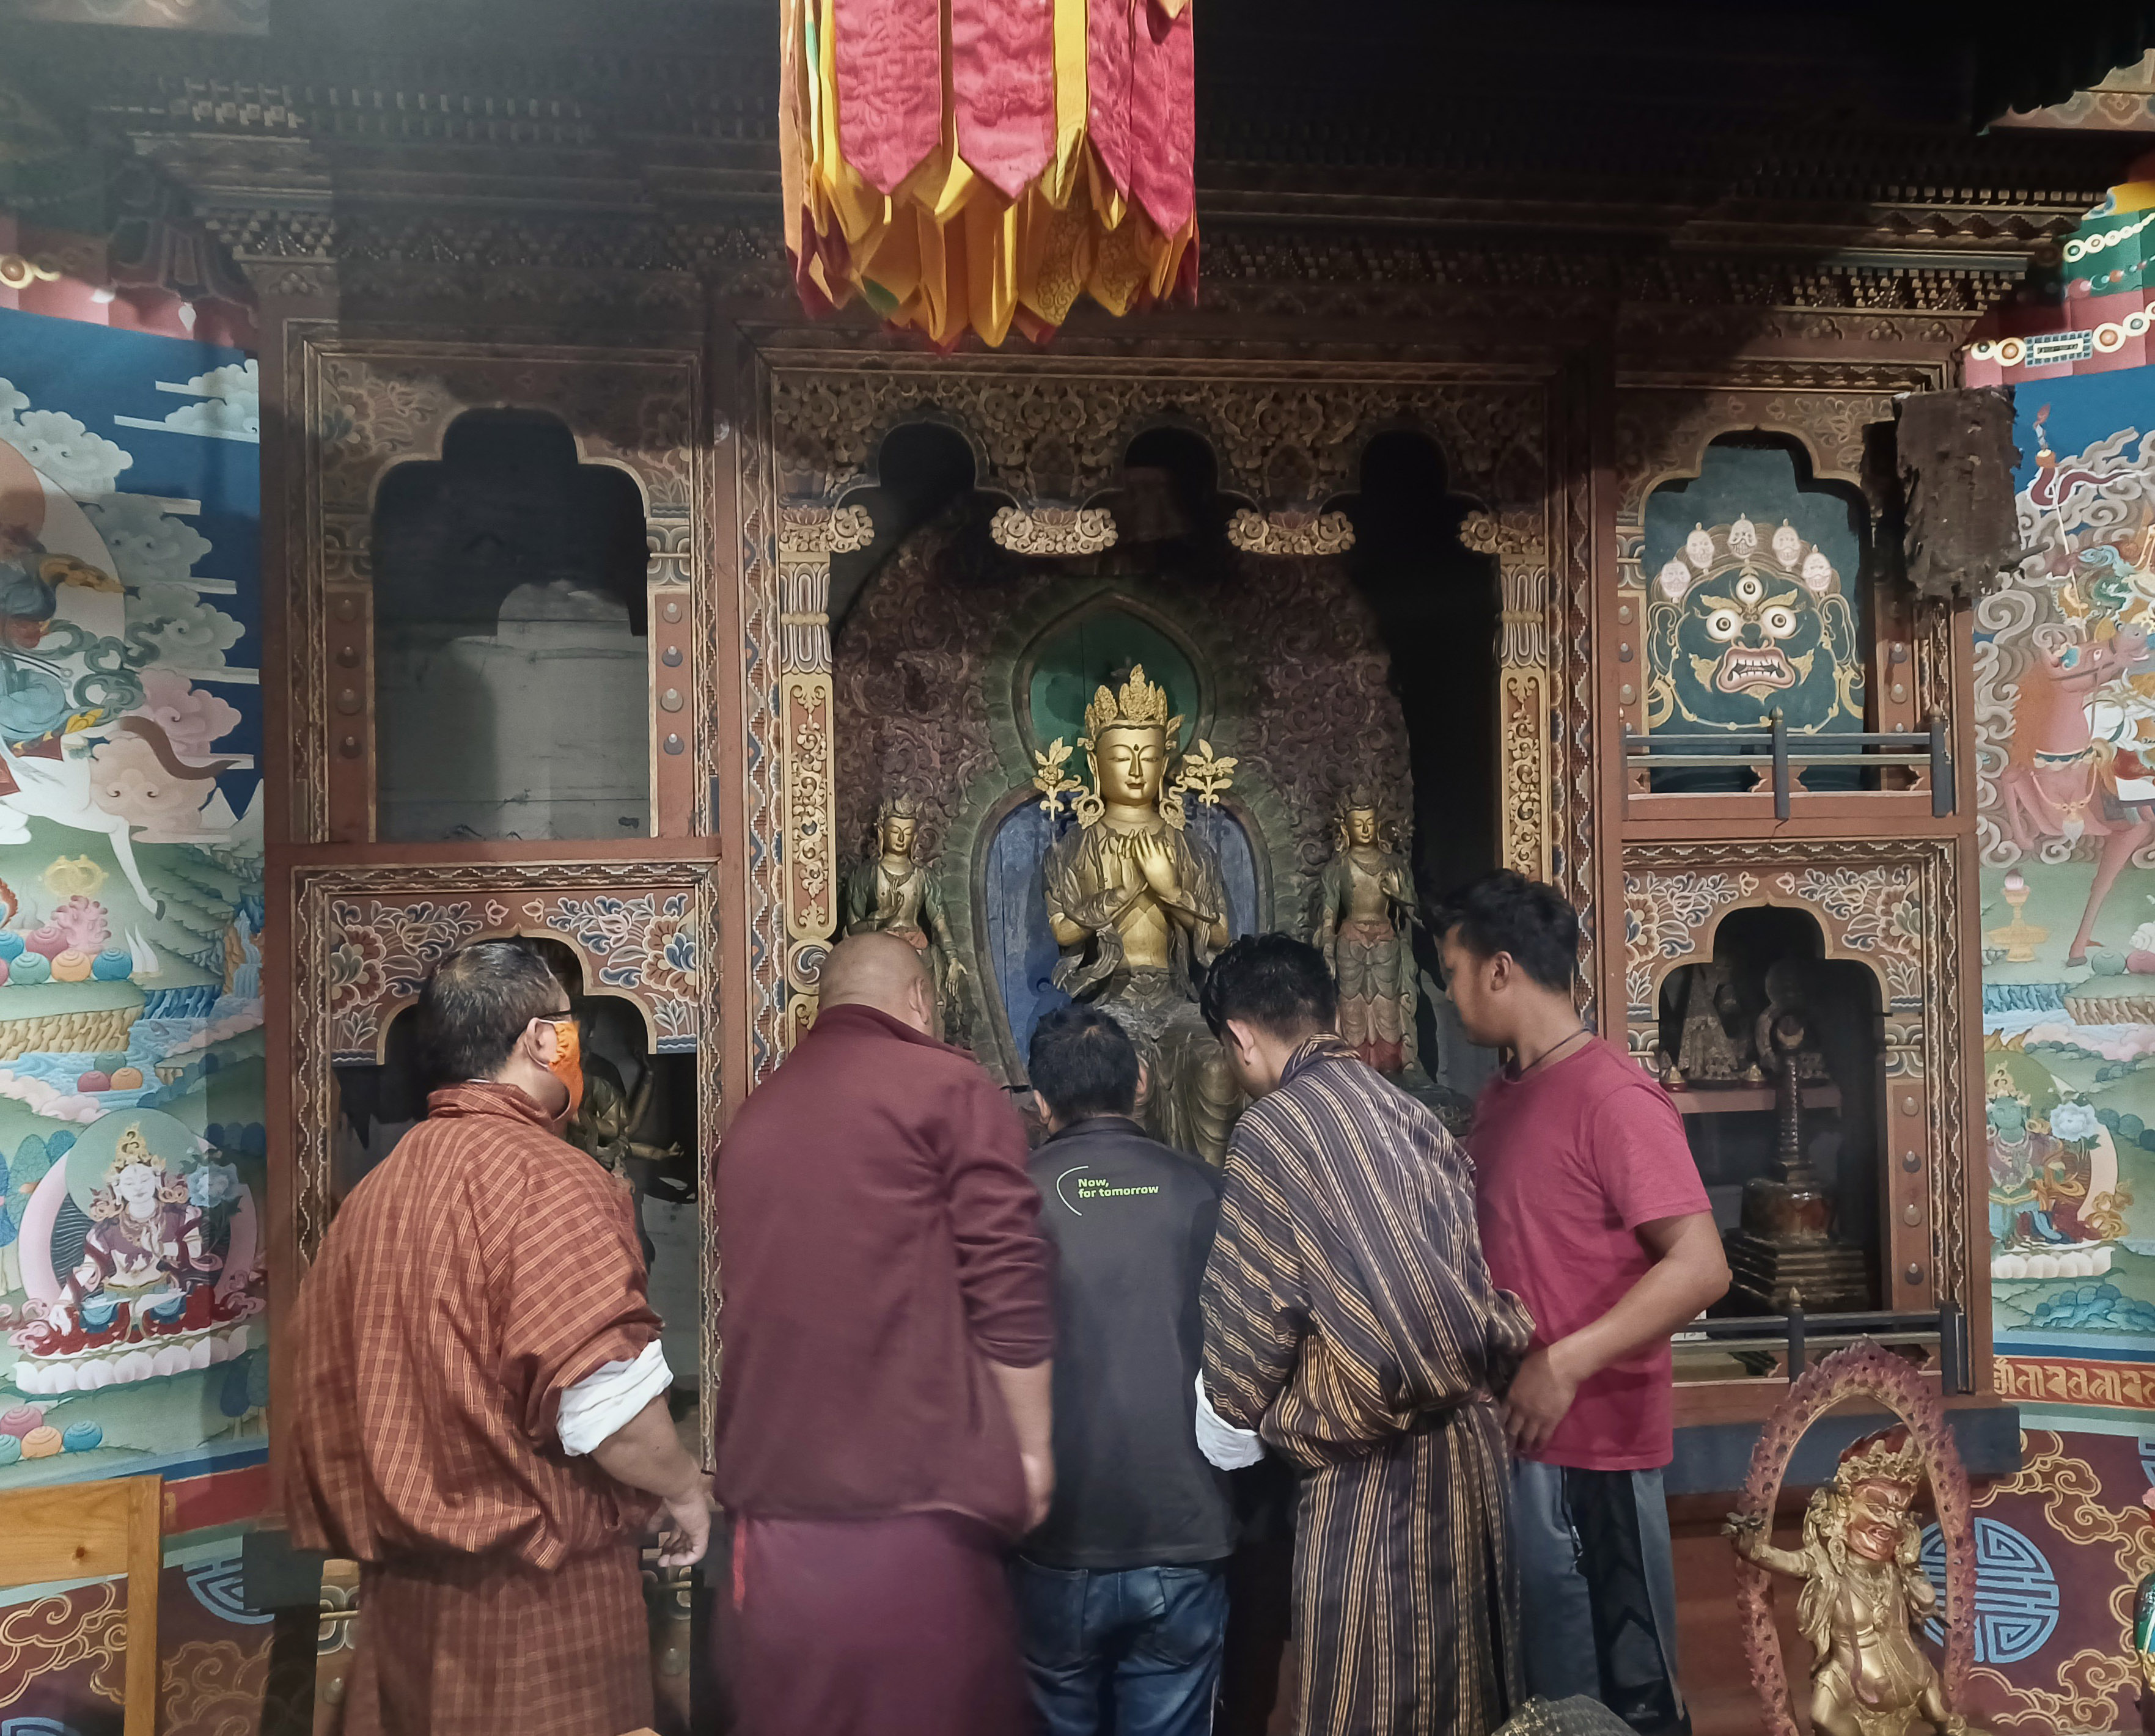 A group of five men with their backs to the camera grouped in front of a shrine. This contains three gold coloured statues, the central one is the larger than the others. The shrine is highly decorated and the walls are painted with religious scenes.